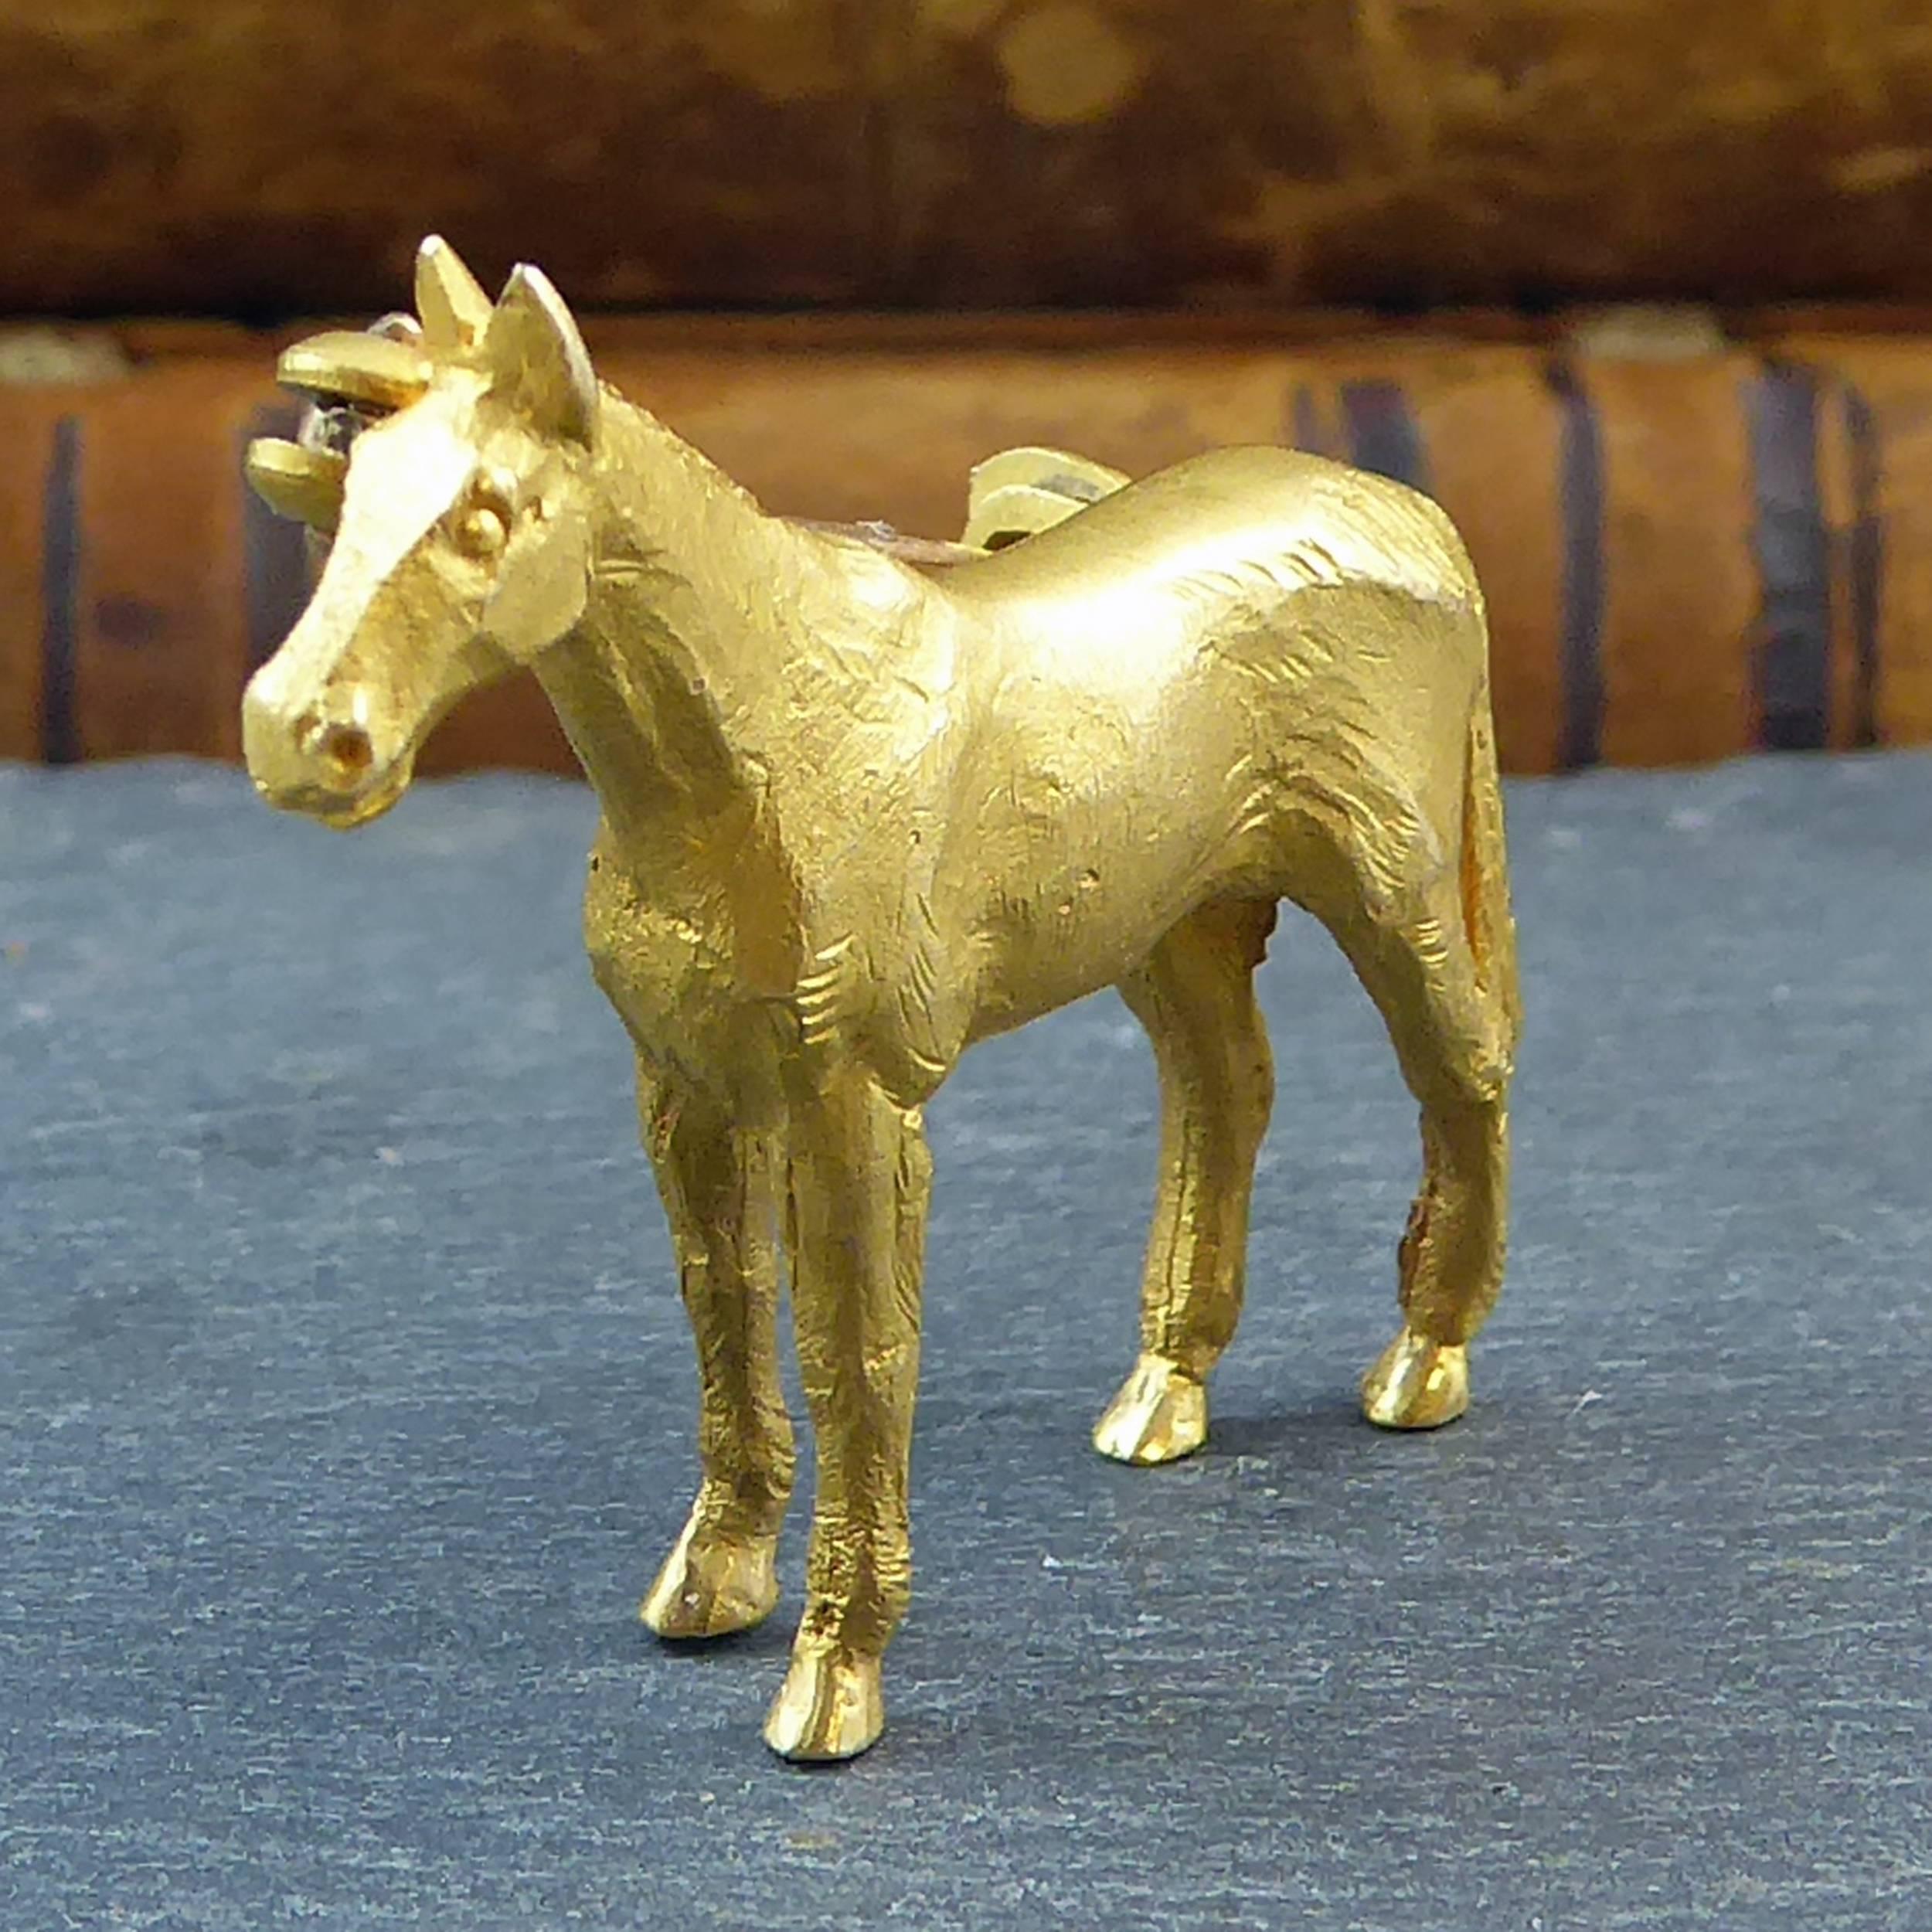 A beautifully modelled horse brooch from the renowned Alabaster and Wilson company, makers of fine equestrian jewellery for over a century and the goldsmiths chosen to create a specially commissioned racing design to mark Her Majestey Queen